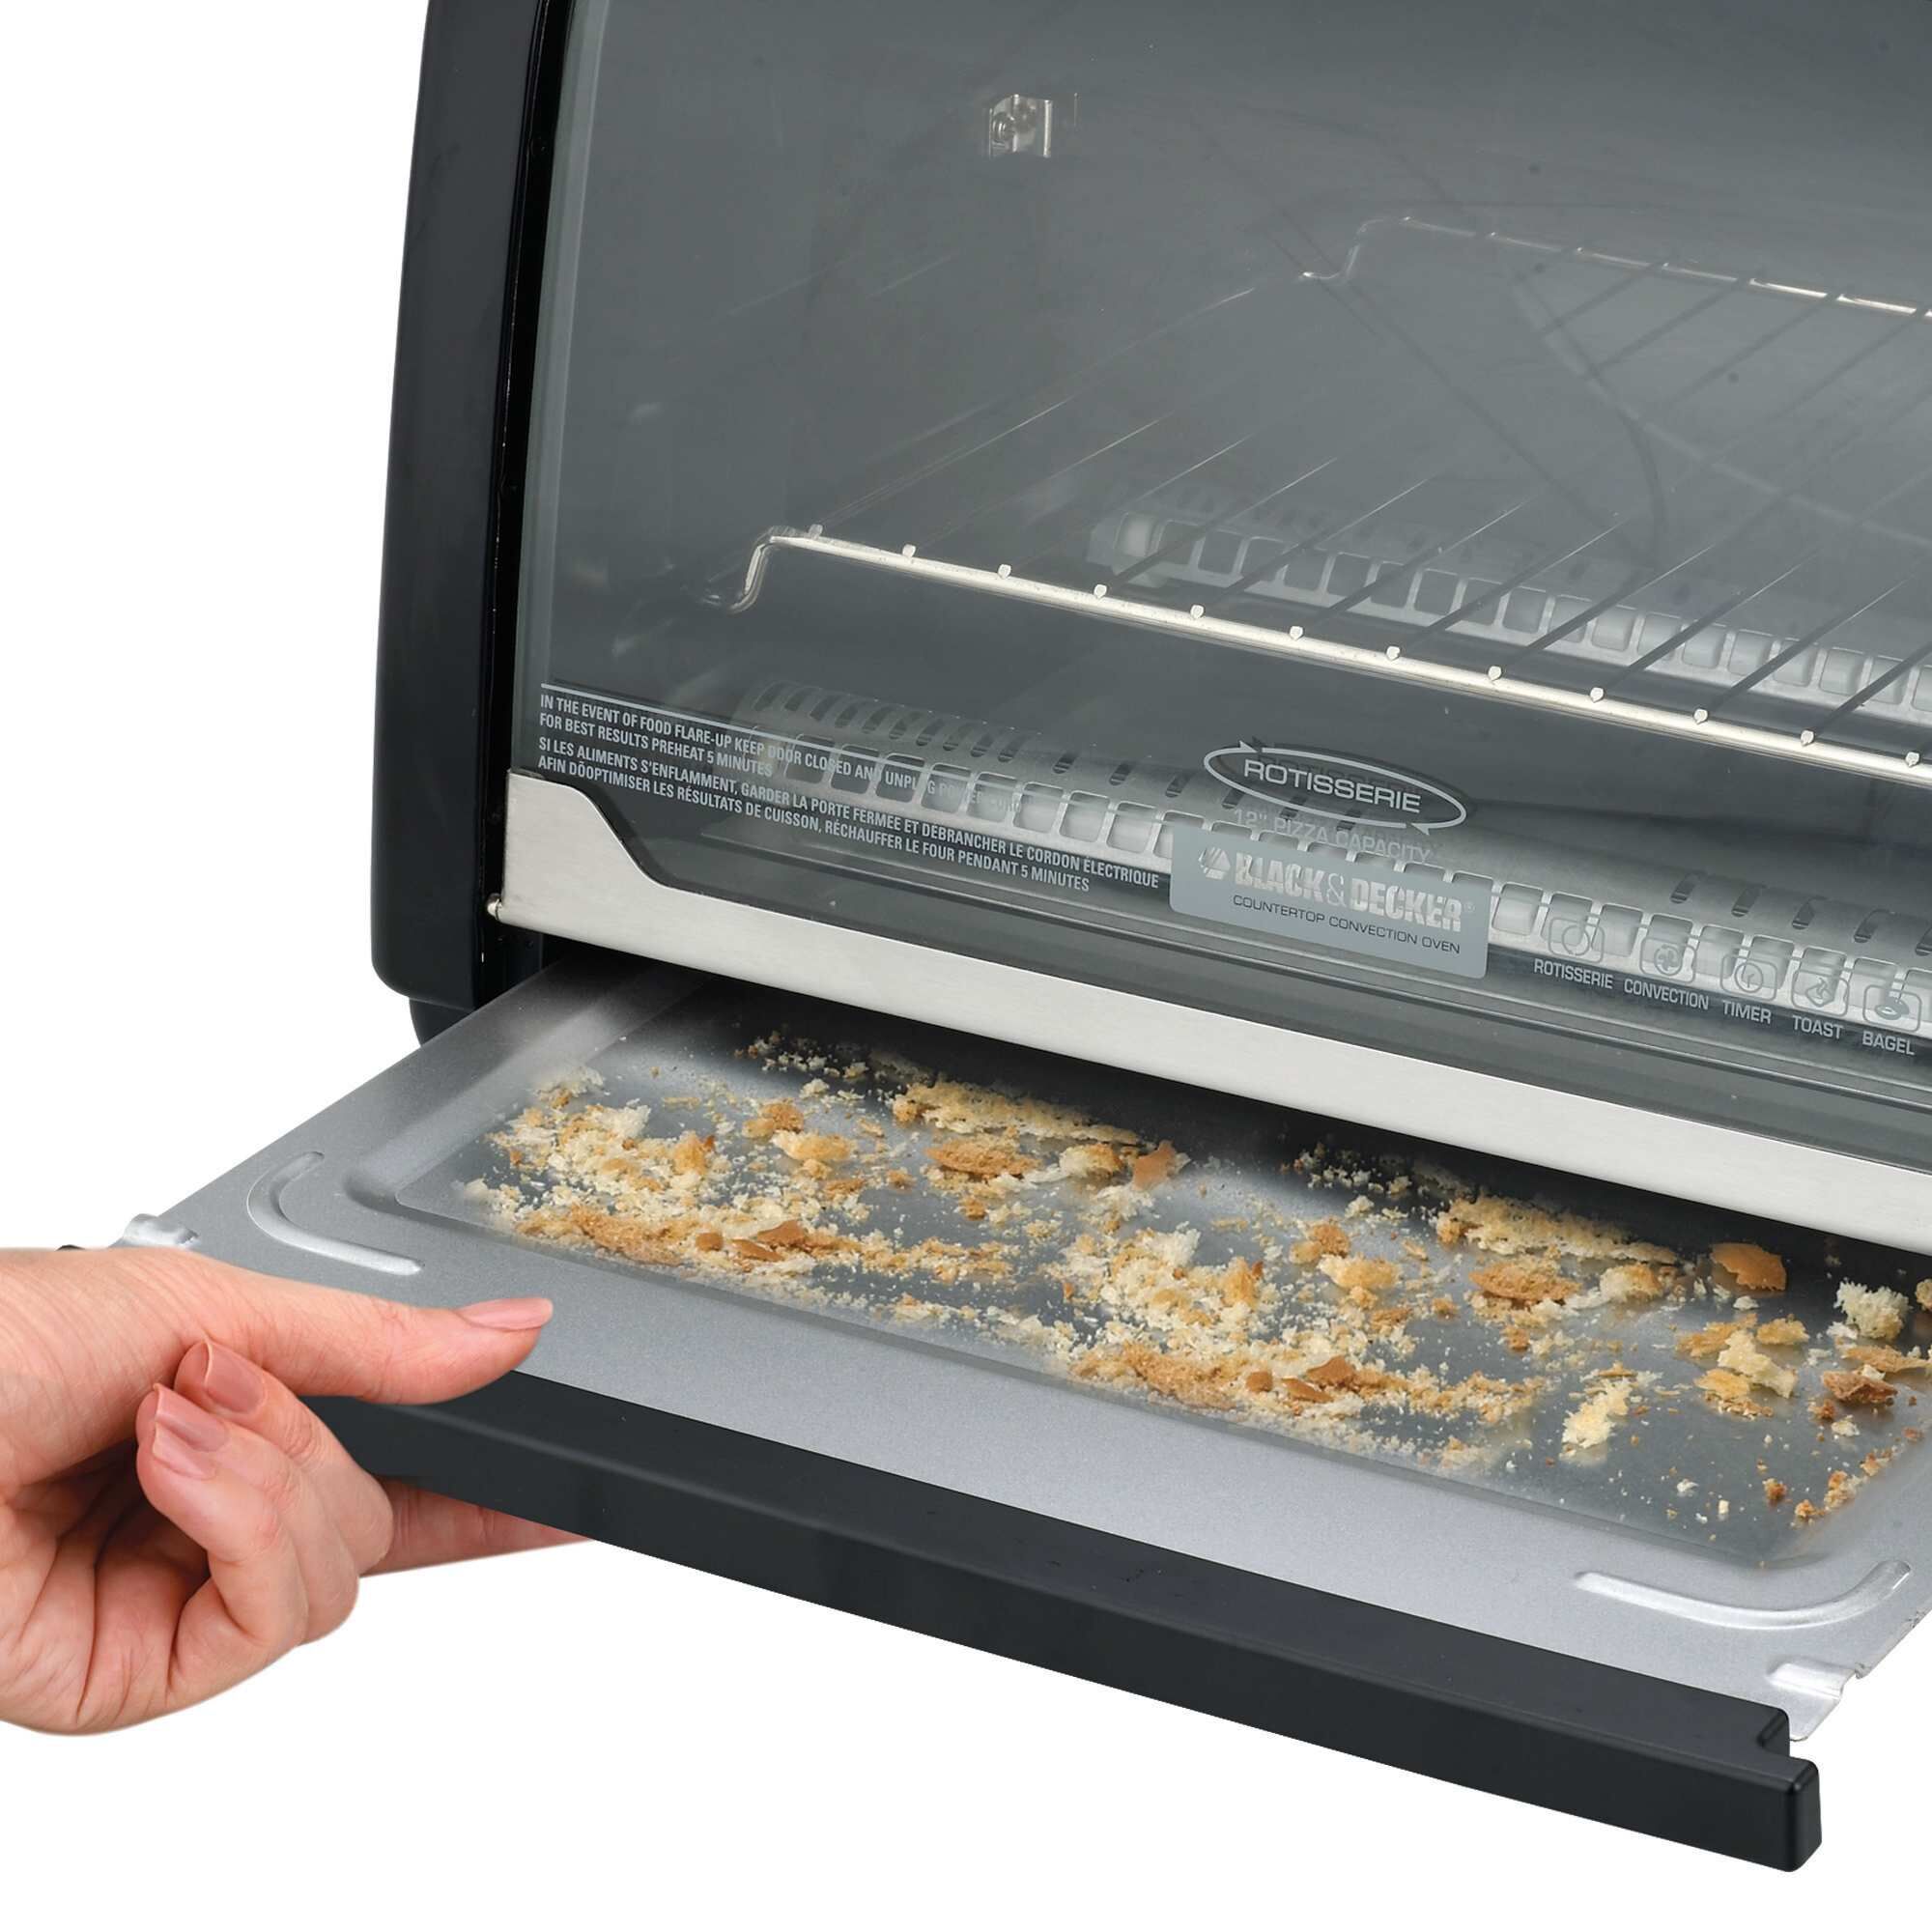 Removable crumb tray for the BLACK+DECKER toaster oven